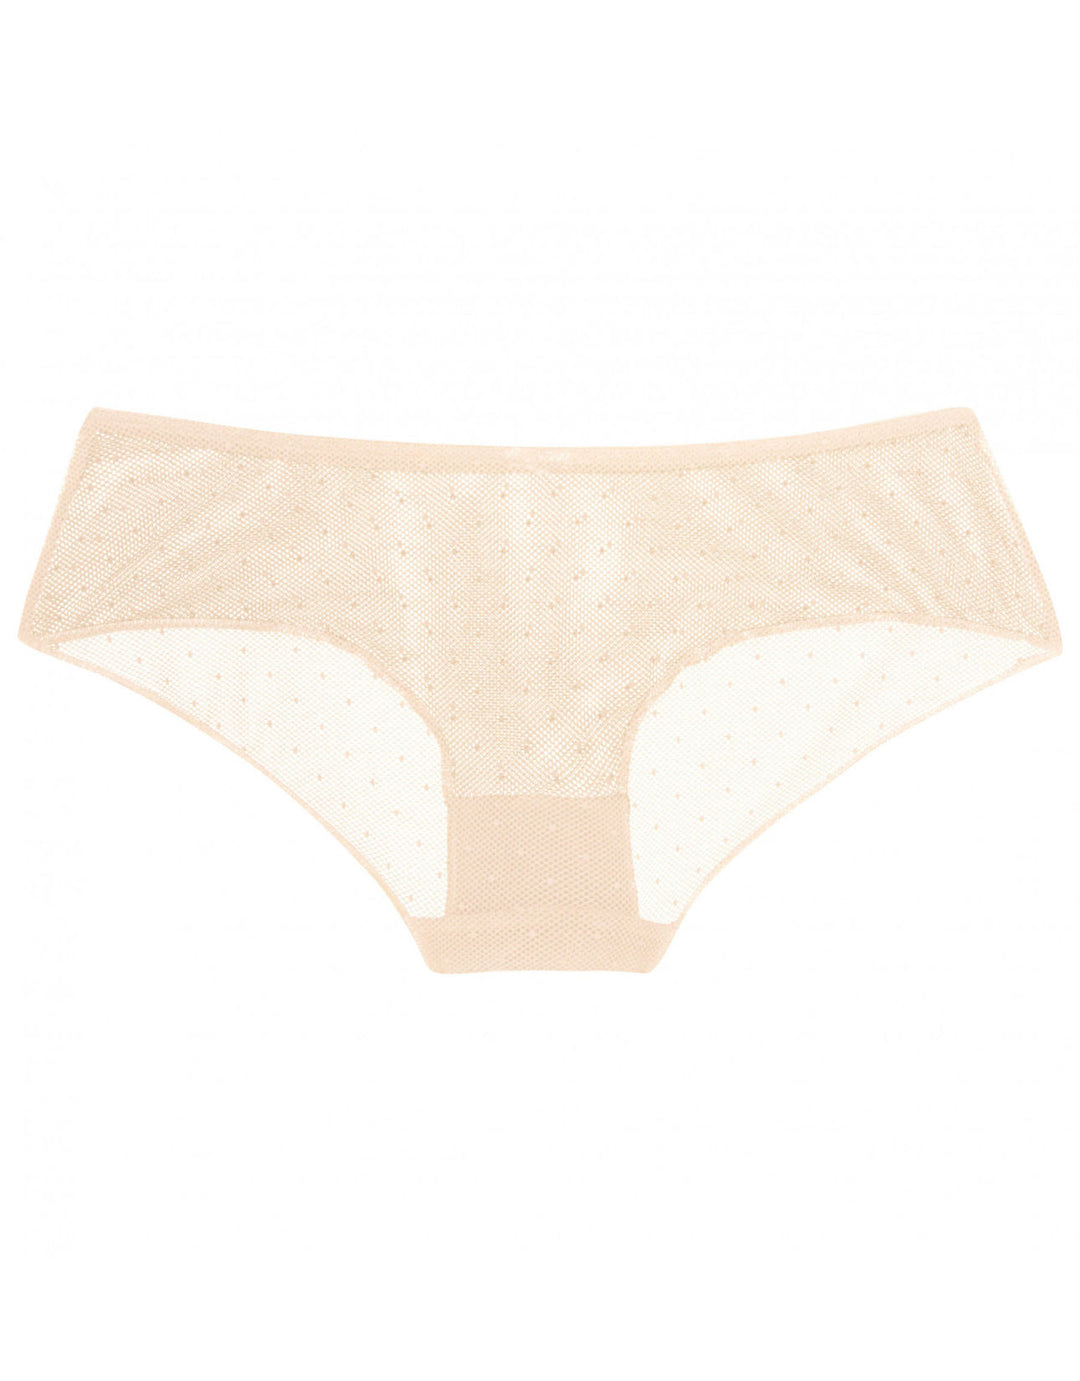 bodas-jabouley-pink-lace-low-hipster-brief